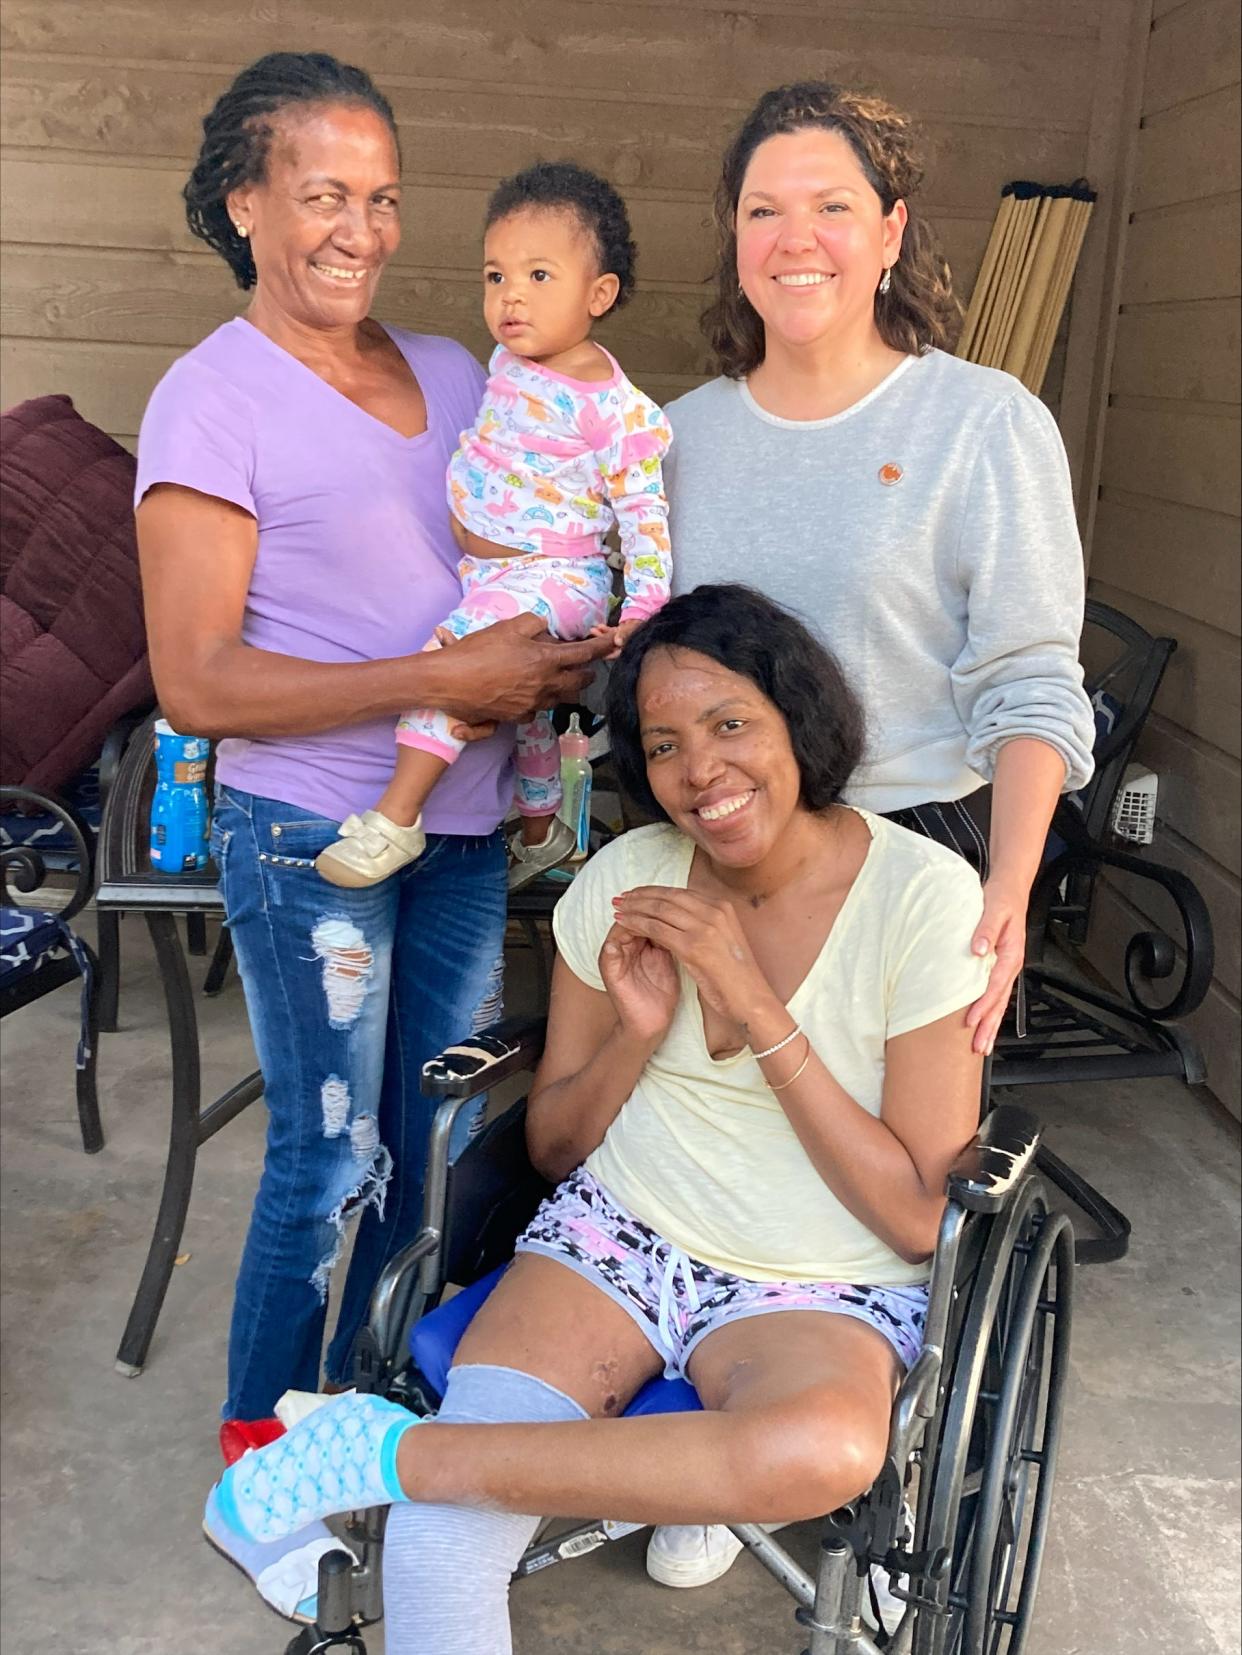 Community health worker Brenda Garza, right, helped Maidelys Hernandez, seated, reconnect with her mother Josefina Gasso and her daughter Elif as Hernandez was recovering from multiple health issues after giving birth. Hernandez was in the hospital from May 8, 2021, to Dec. 13, 2021, and then in rehab until July 20. She needed multiple amputations including one to her leg.